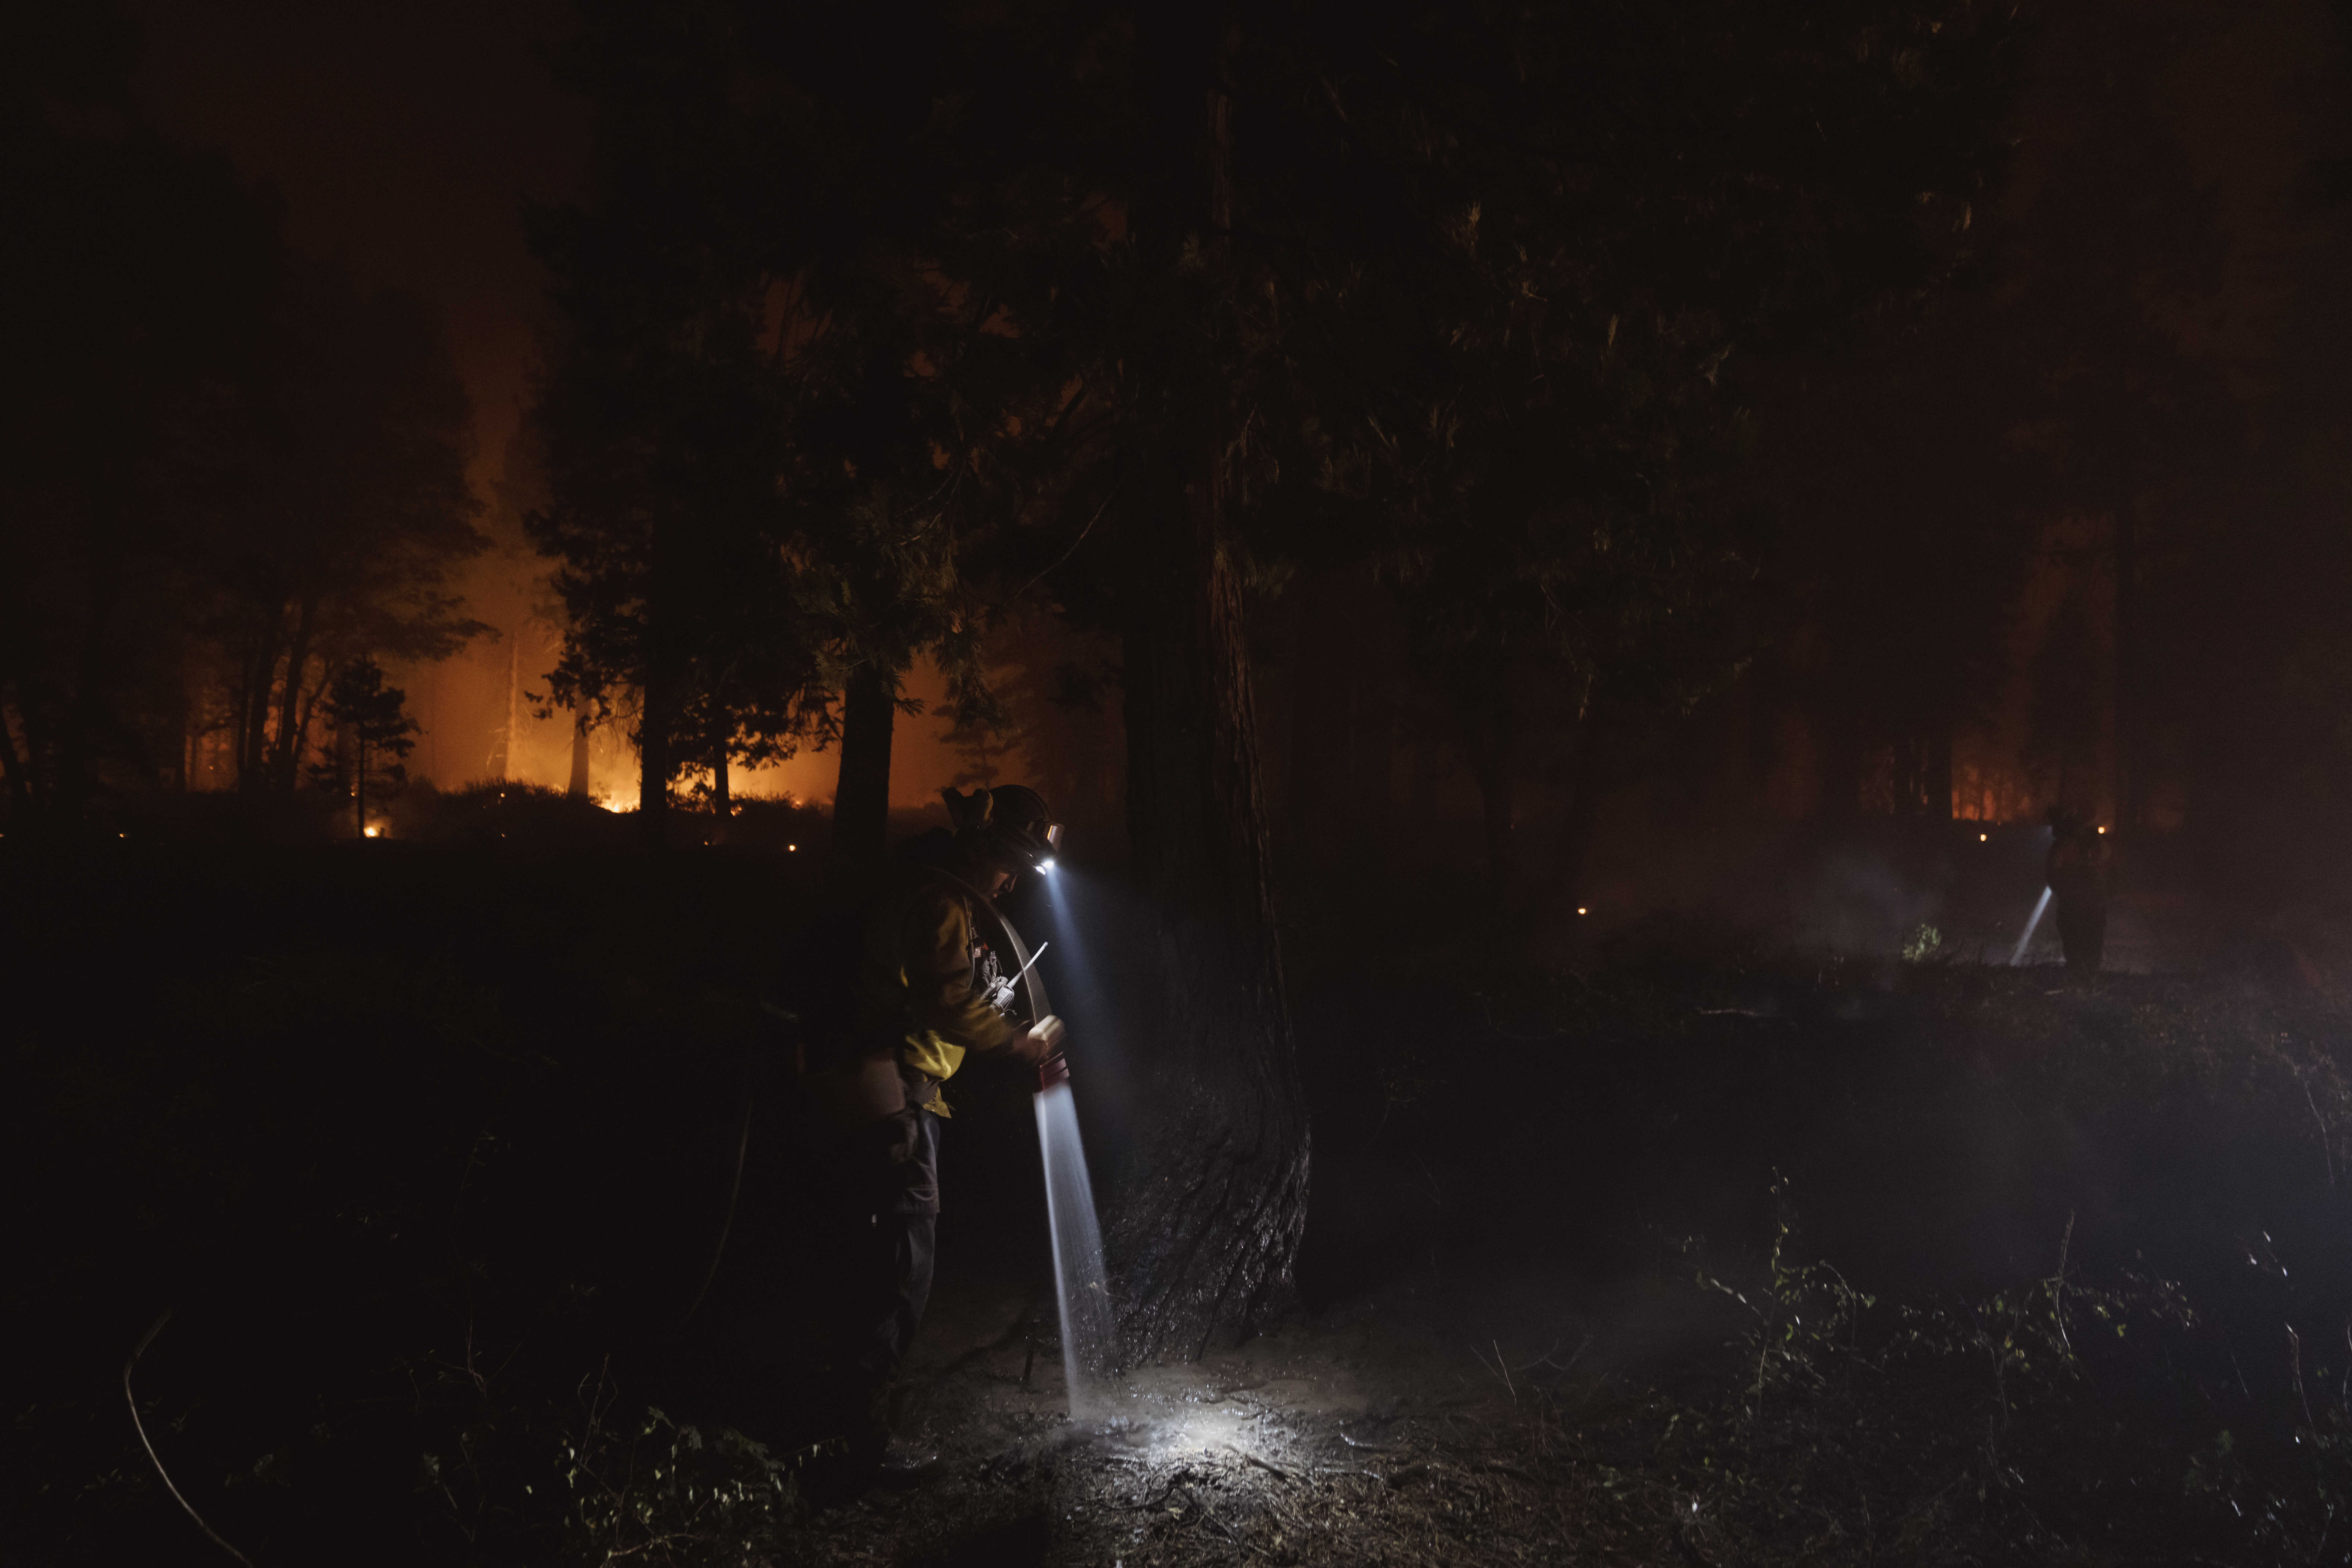 Firefighters spray down hot spots during the Mosquito Fire on Sept. 14, 2022 in Foresthill, California. Credit: Eric Thayer/Getty Images